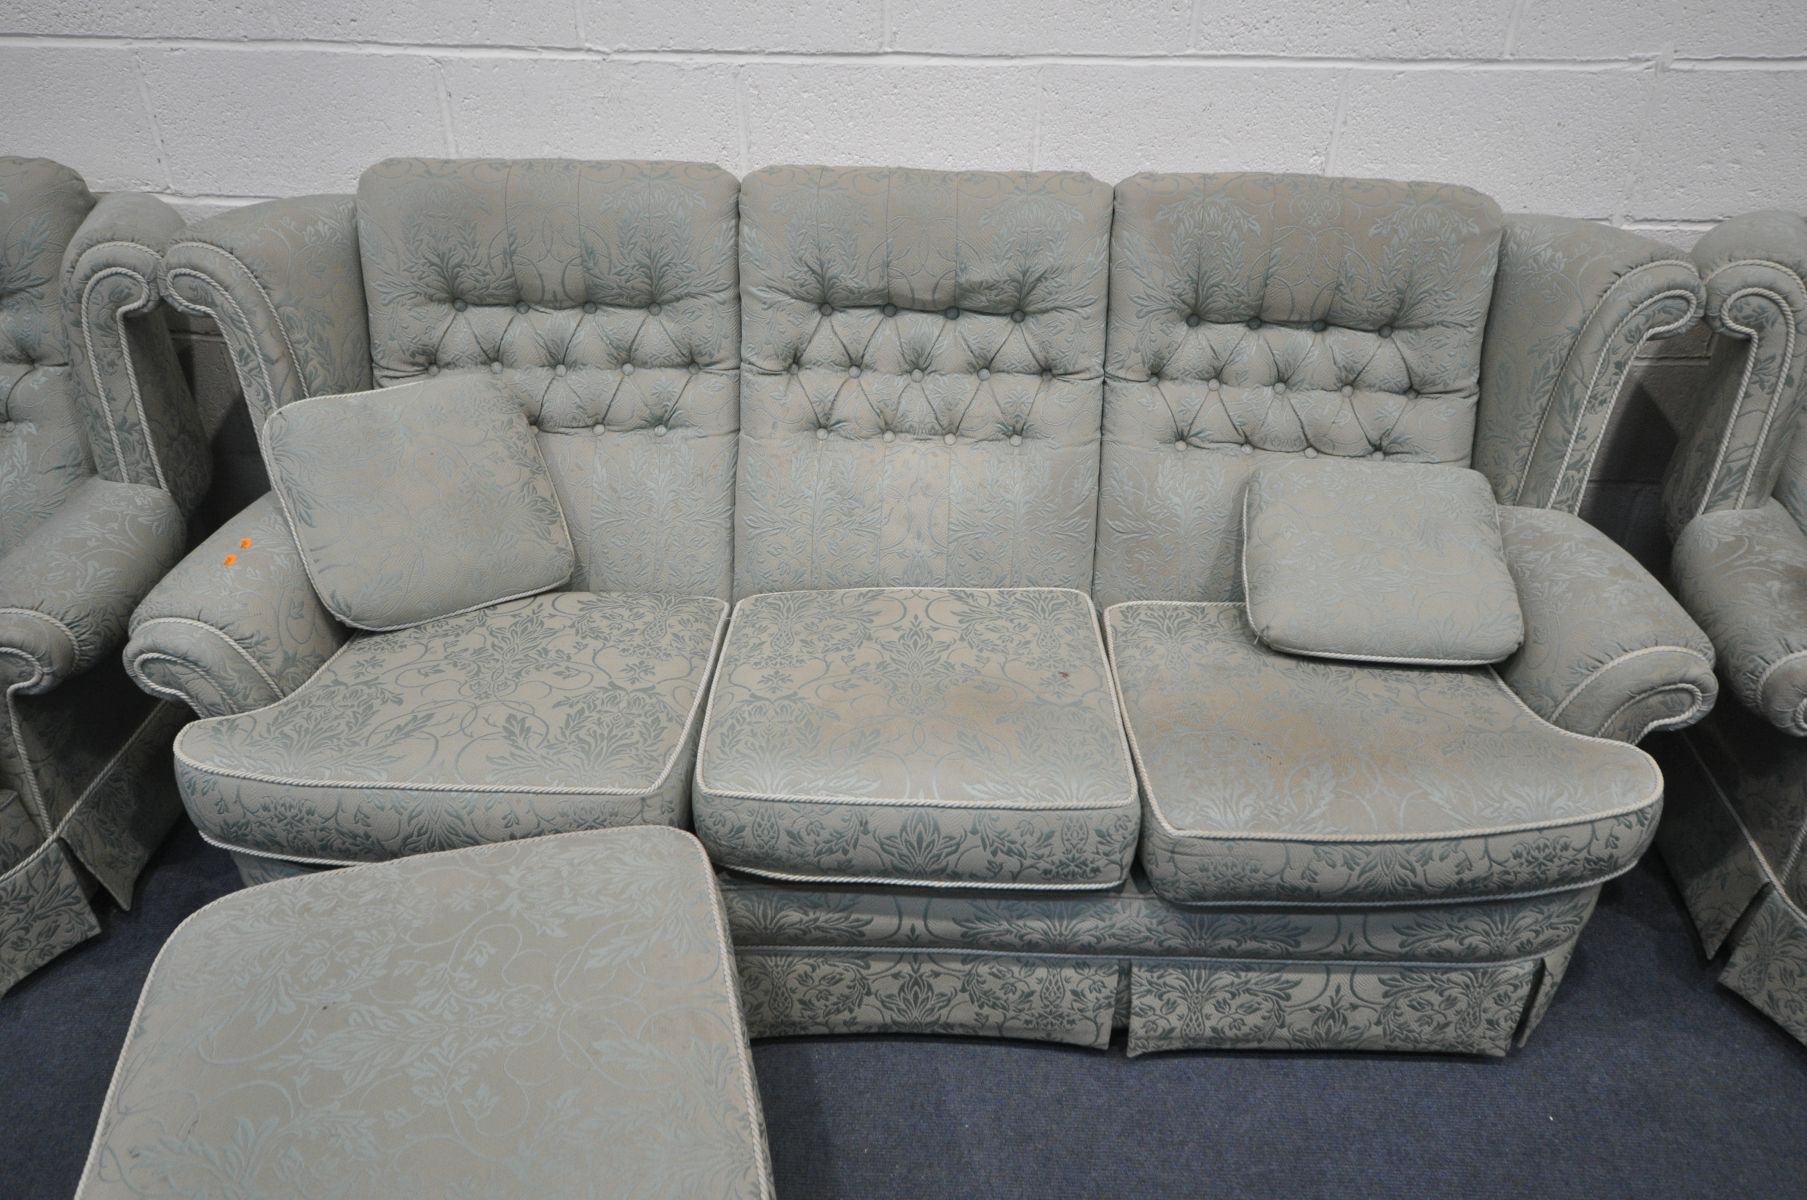 A FLORAL GREEN UPHOLSTERED LOUNGE SUITE, comprising a three seater sofa, pair of armchairs and a - Image 2 of 3